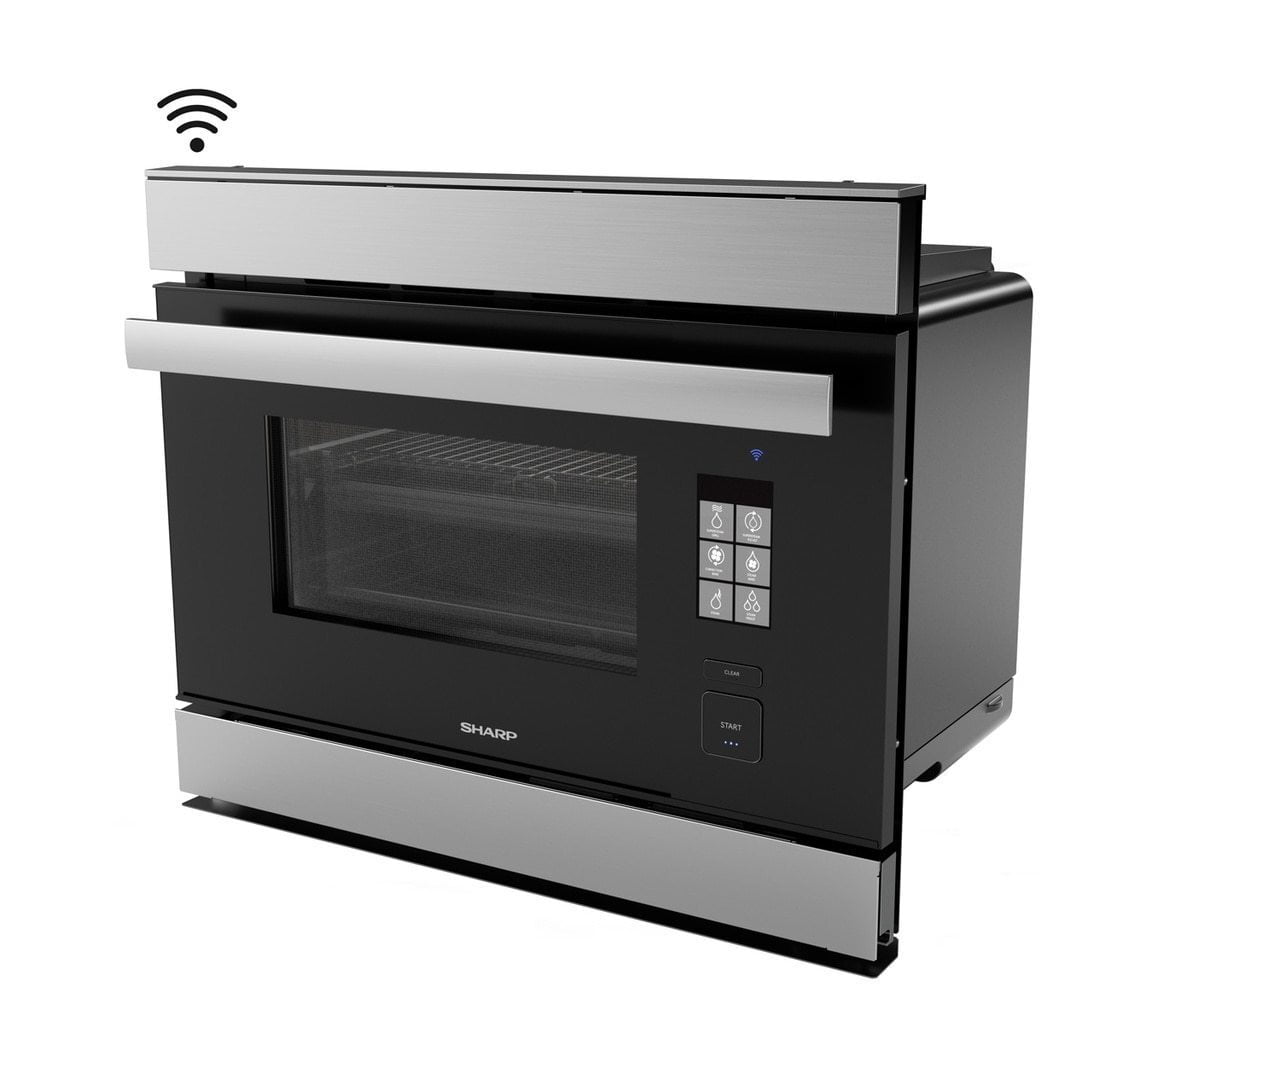 Sharp SSC2489DS Supersteam+ Built-In Wall Oven